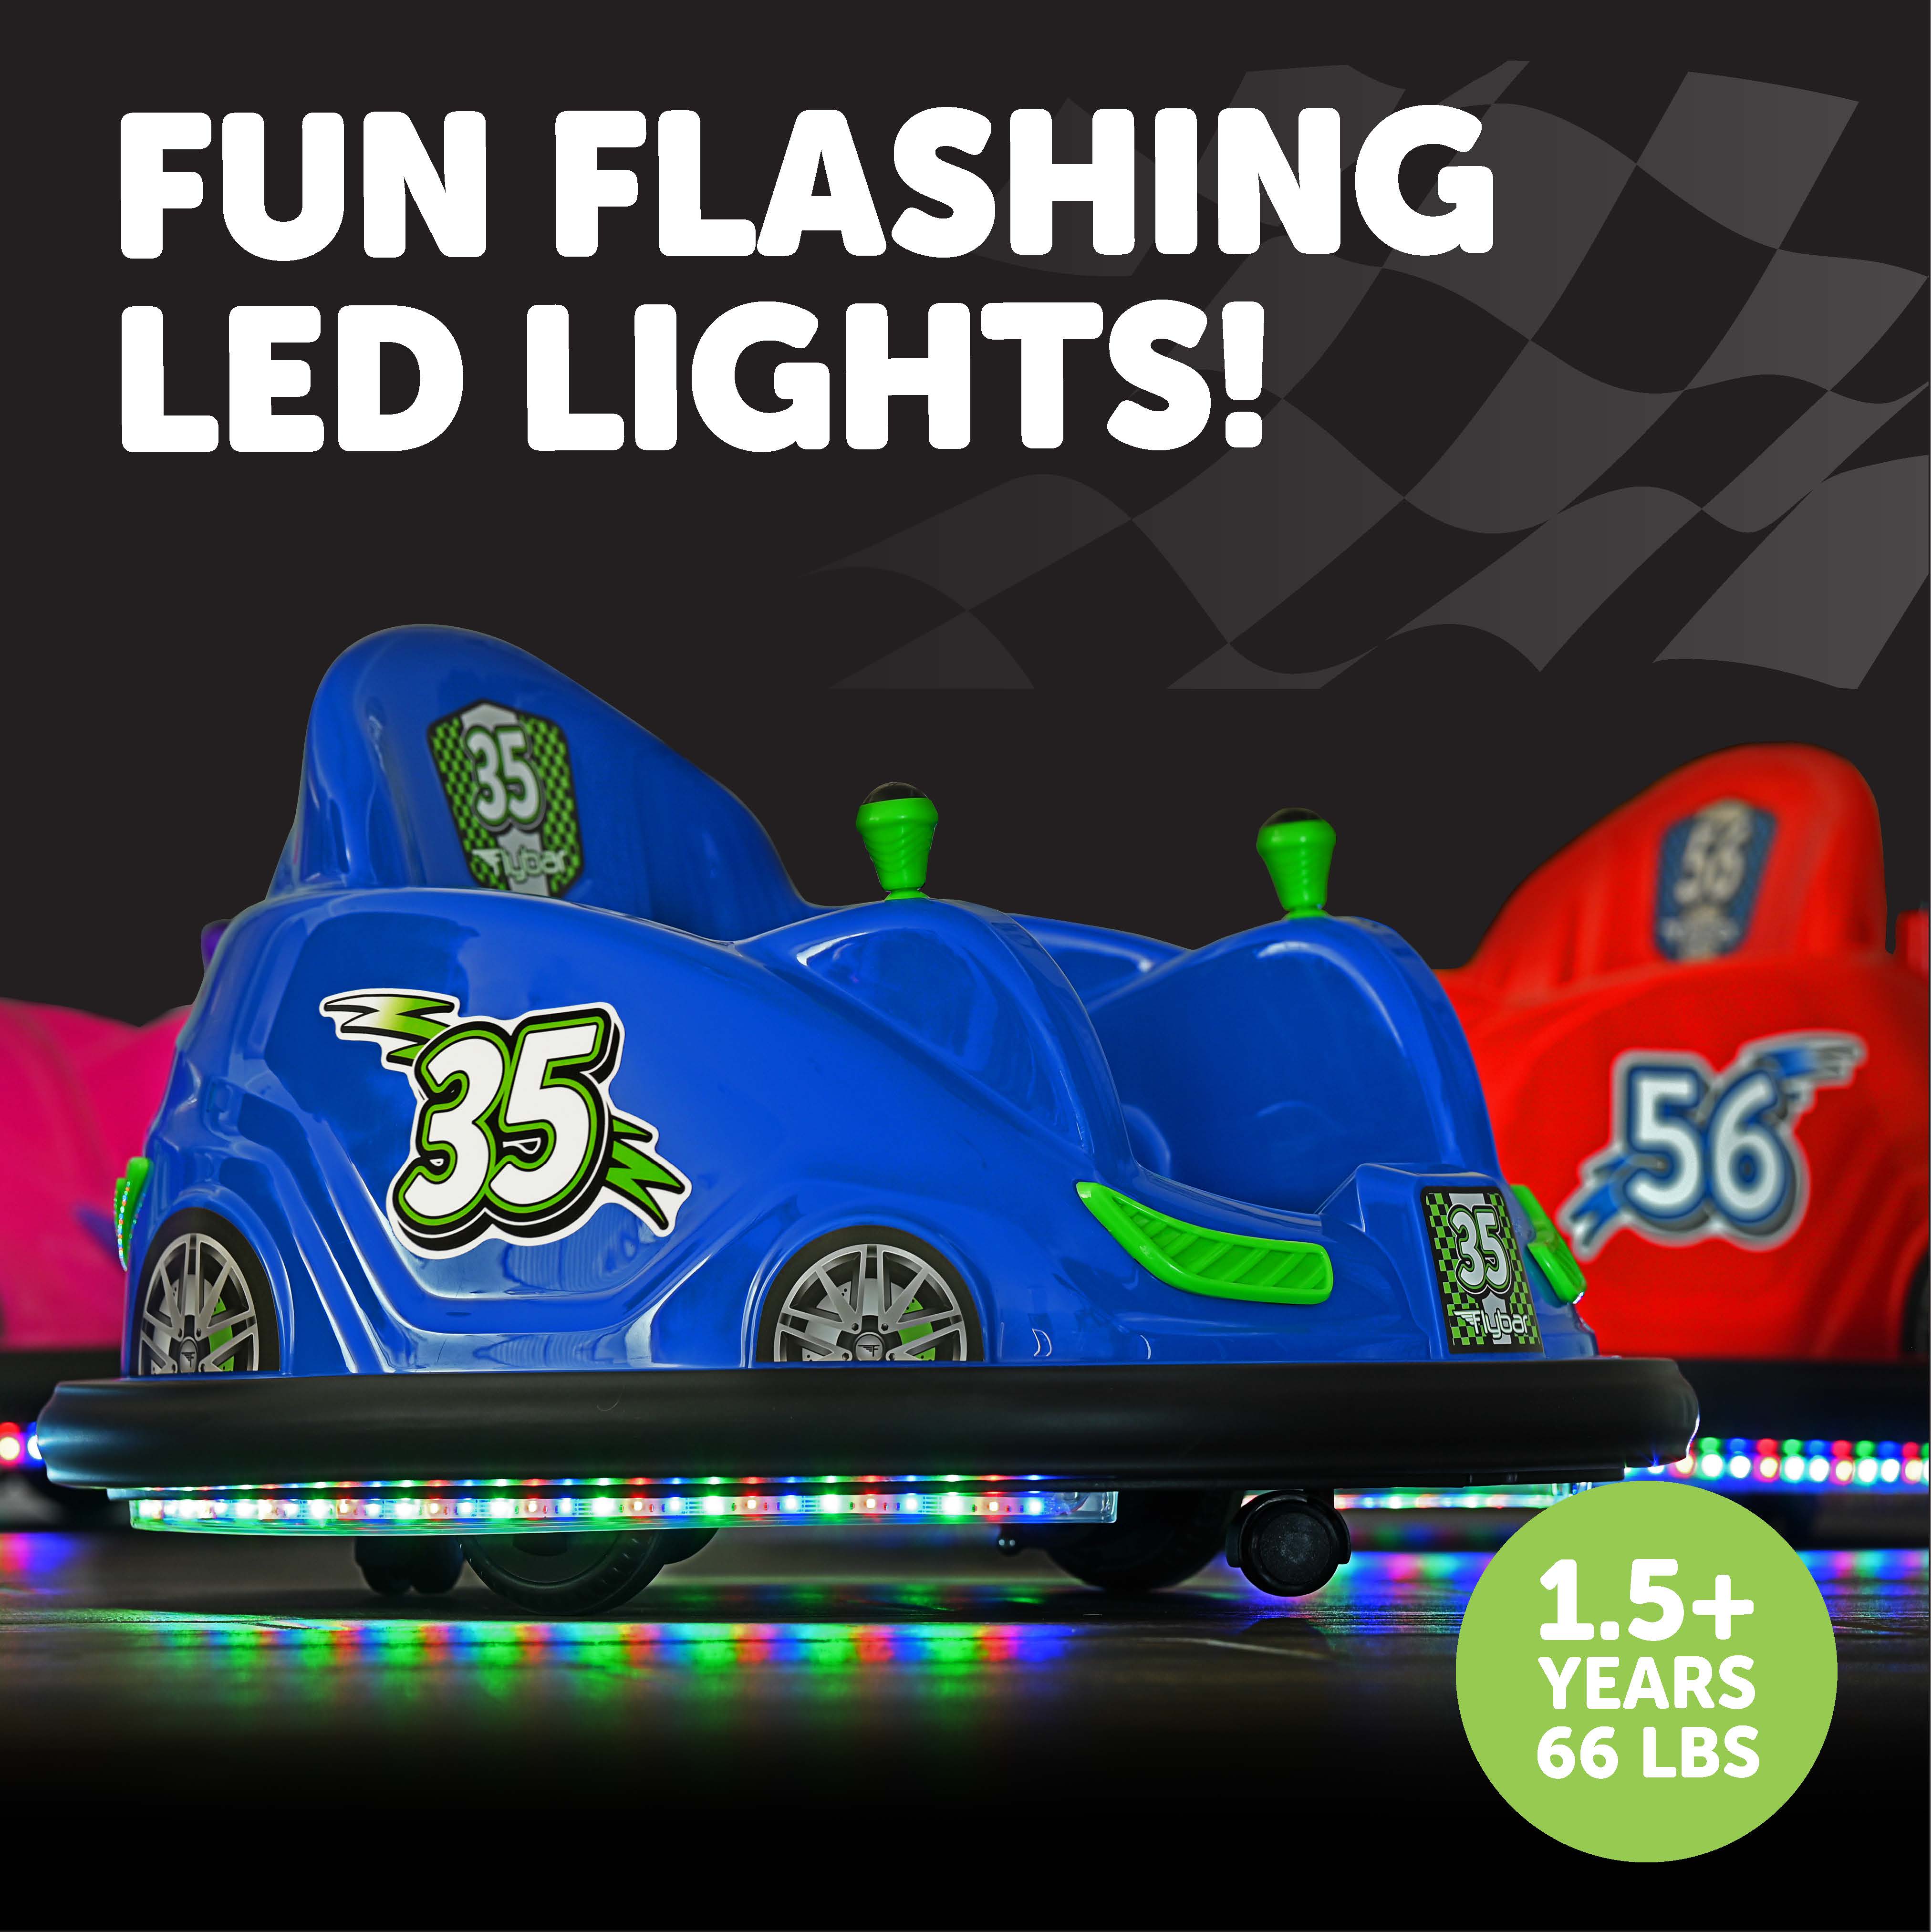 Flybar 6 Volts Bumper Car, Battery Powered Ride on, Fun LED Lights, Includes Charger, Blue - image 5 of 10